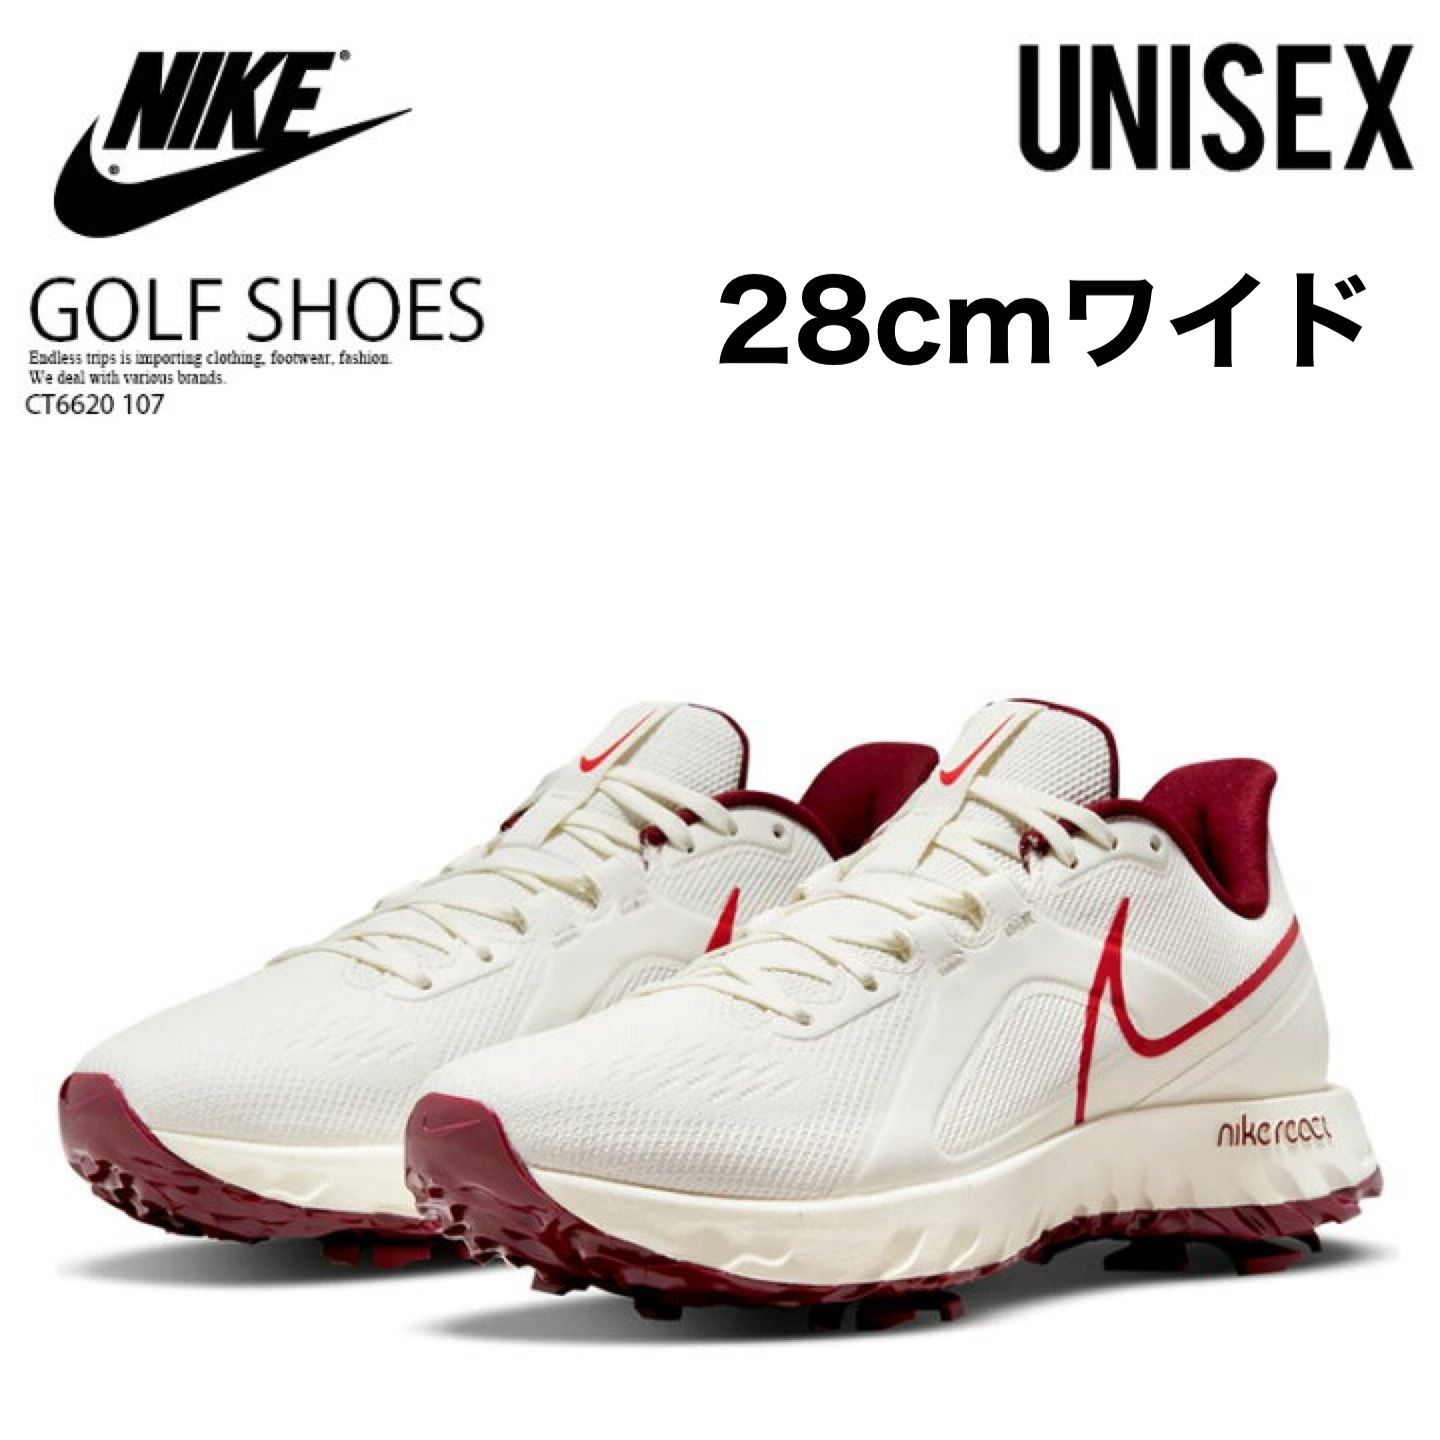 NIKE REACT INFINITY PRO GOLF SHOES SAIL/FASION RED ナイキ リアクト